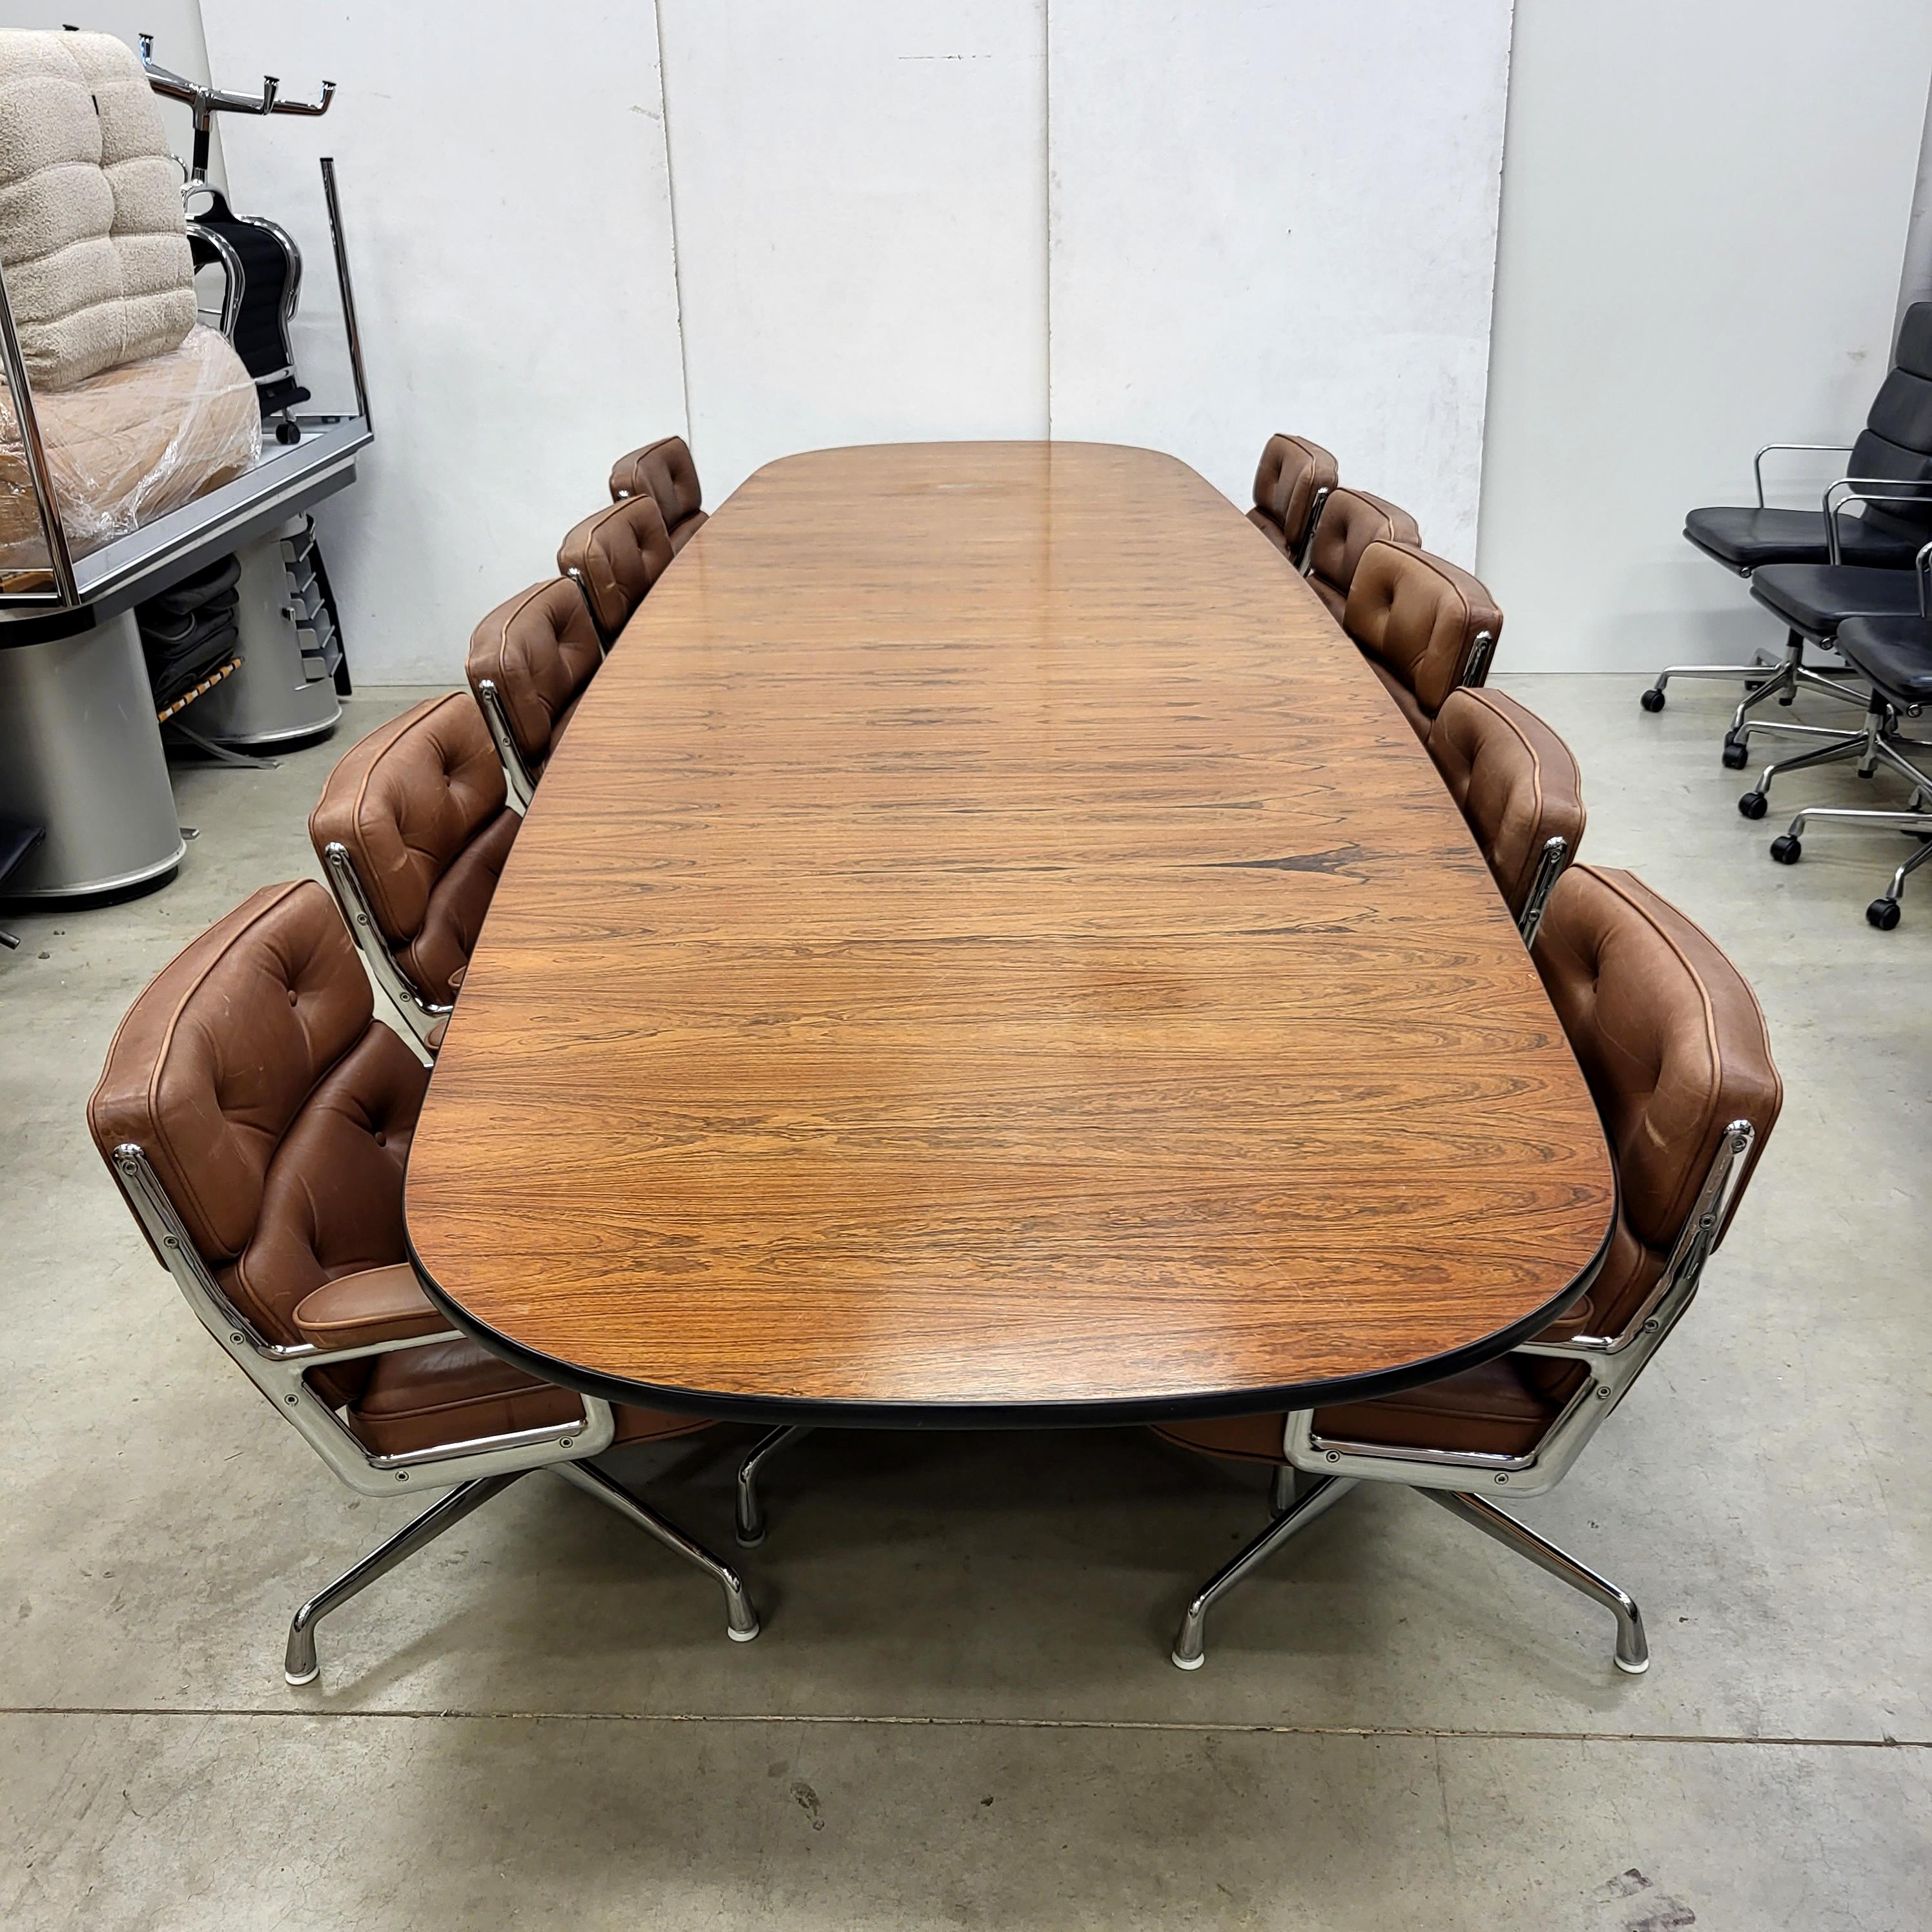 This lot is a 1 of a kind opportunity!

Fine and very rare 15ft segmented table by Charles Eames for Herman Miller with 10x superb Midbrown office lobby chairs model ES105 produced by Vitra. The chairs features a chromed aluminium frame and are all